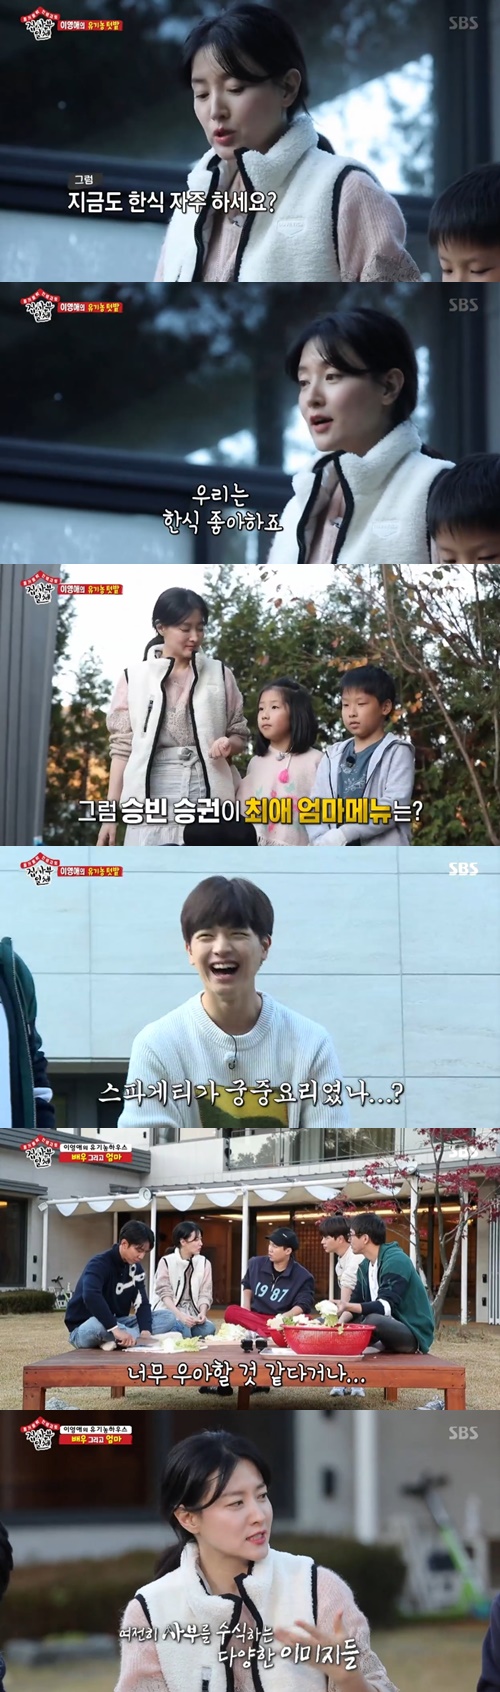 All The Butlers Lee Yeong-ae has spoken about preconceptions.Actor Lee Yeong-ae appeared as master in the SBS entertainment program All The Butlers, which aired on the afternoon of the 24th.Lee Seung-gi asked Lee Yeong-ae, Did you learn how to cook at the time of shooting Dae Jang Geum?Lee Yeong-ae replied, I learned court food.Lee Seung-gi then asked Lee Yeong-aes children, What kind of food do you like?The daughter immediately replied Spaghetti, and the upbringing material laughed at the point of saying, I said you only had Korean food.Lee Yeong-ae, meanwhile, said, I think its elegant, but its preconceived. I sometimes sound and do things to my children.